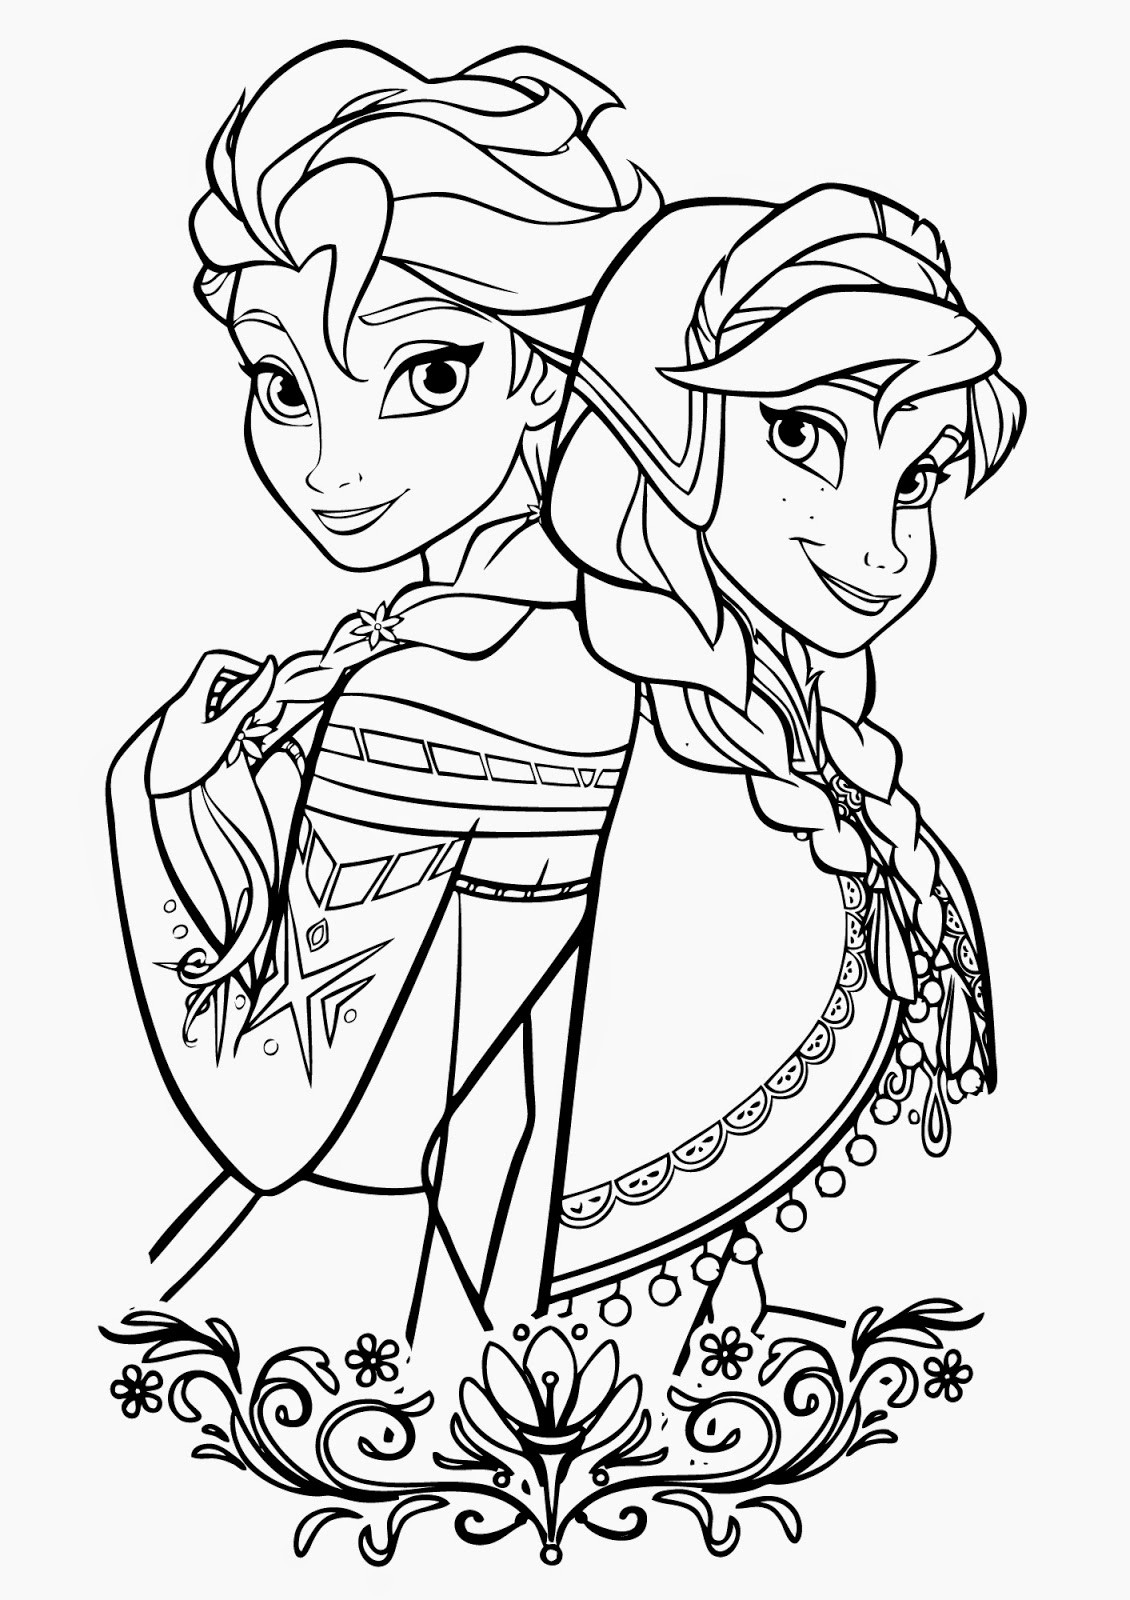 Frozen Coloring Pages For Kids
 Free Printable Elsa Coloring Pages for Kids Best